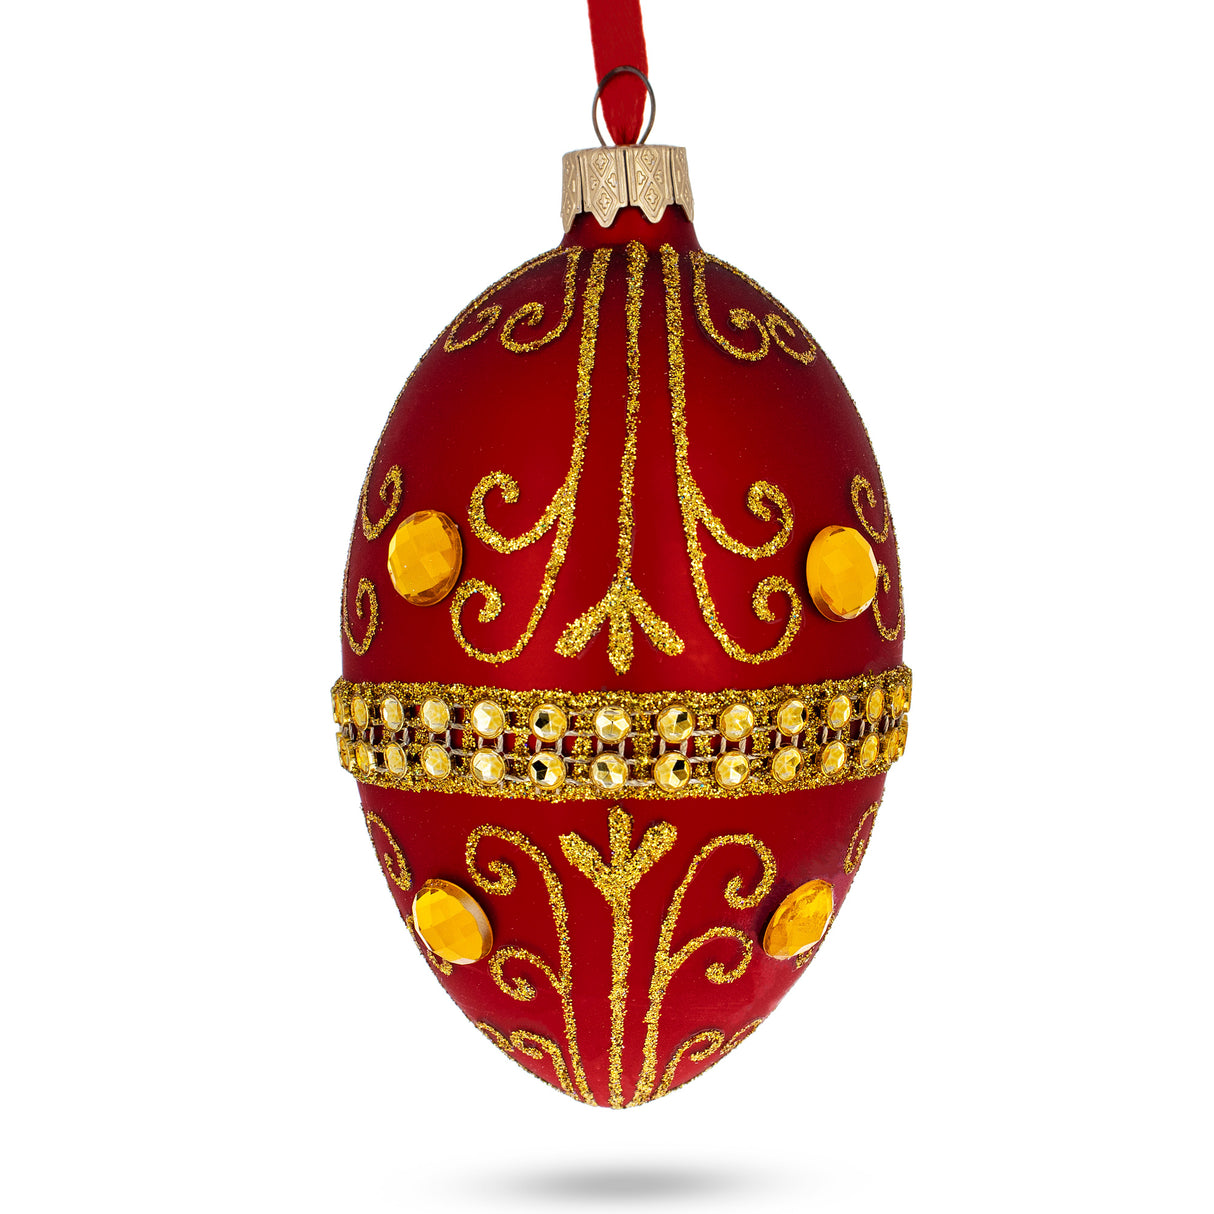 Jeweled Red Glass Egg Ornament 4 Inches in Red color, Oval shape